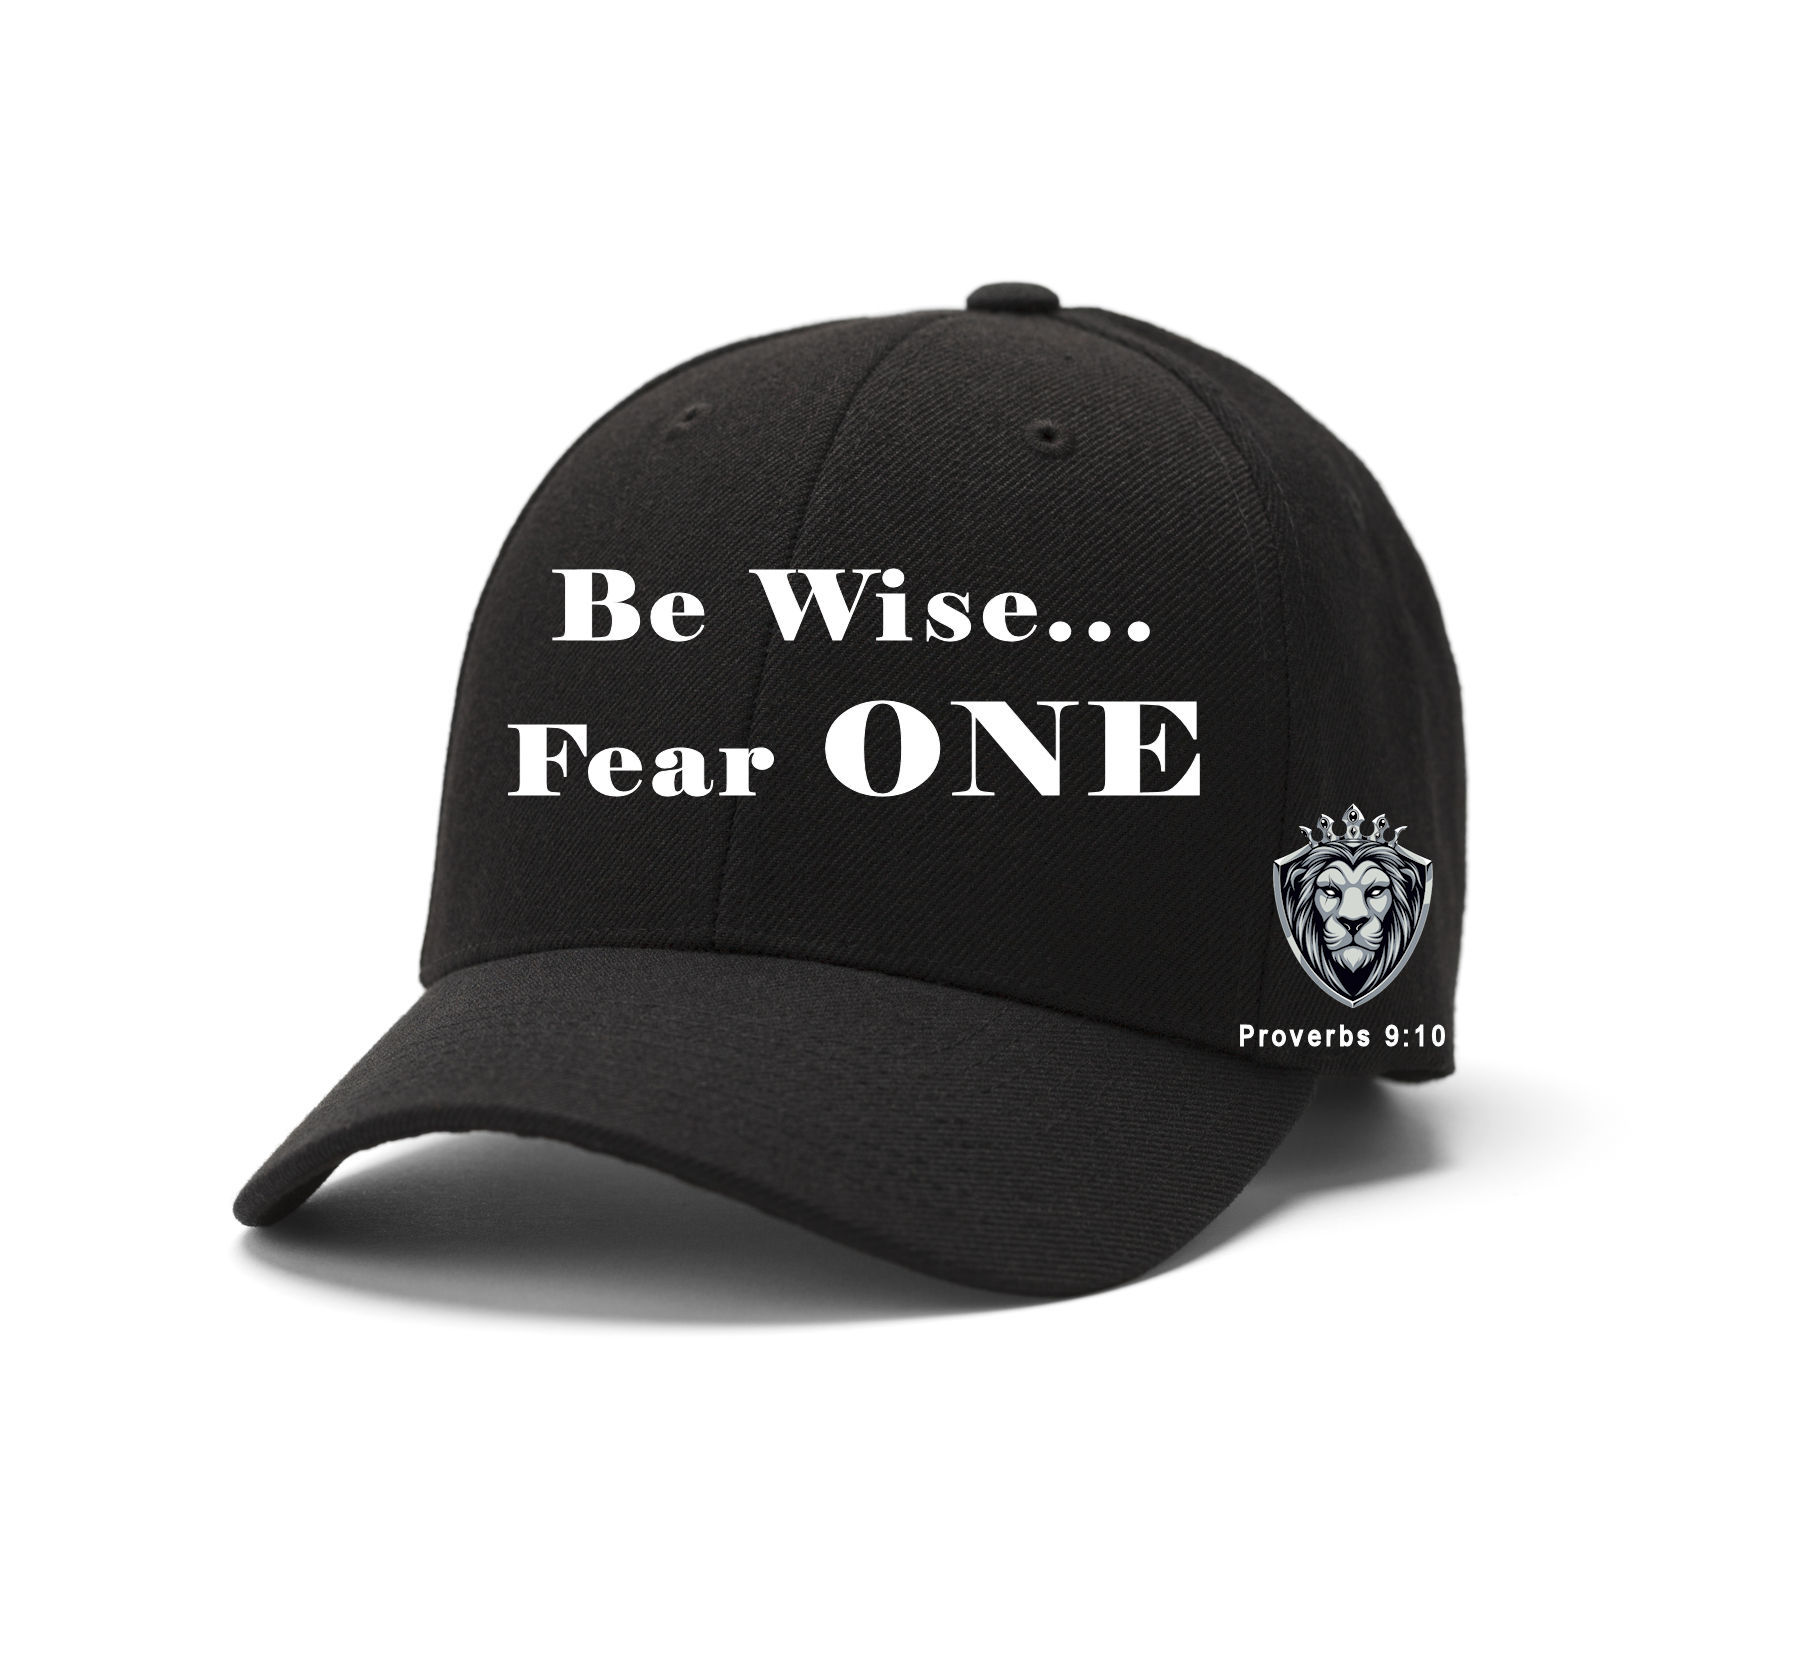 Be Wise…Fear ONE!